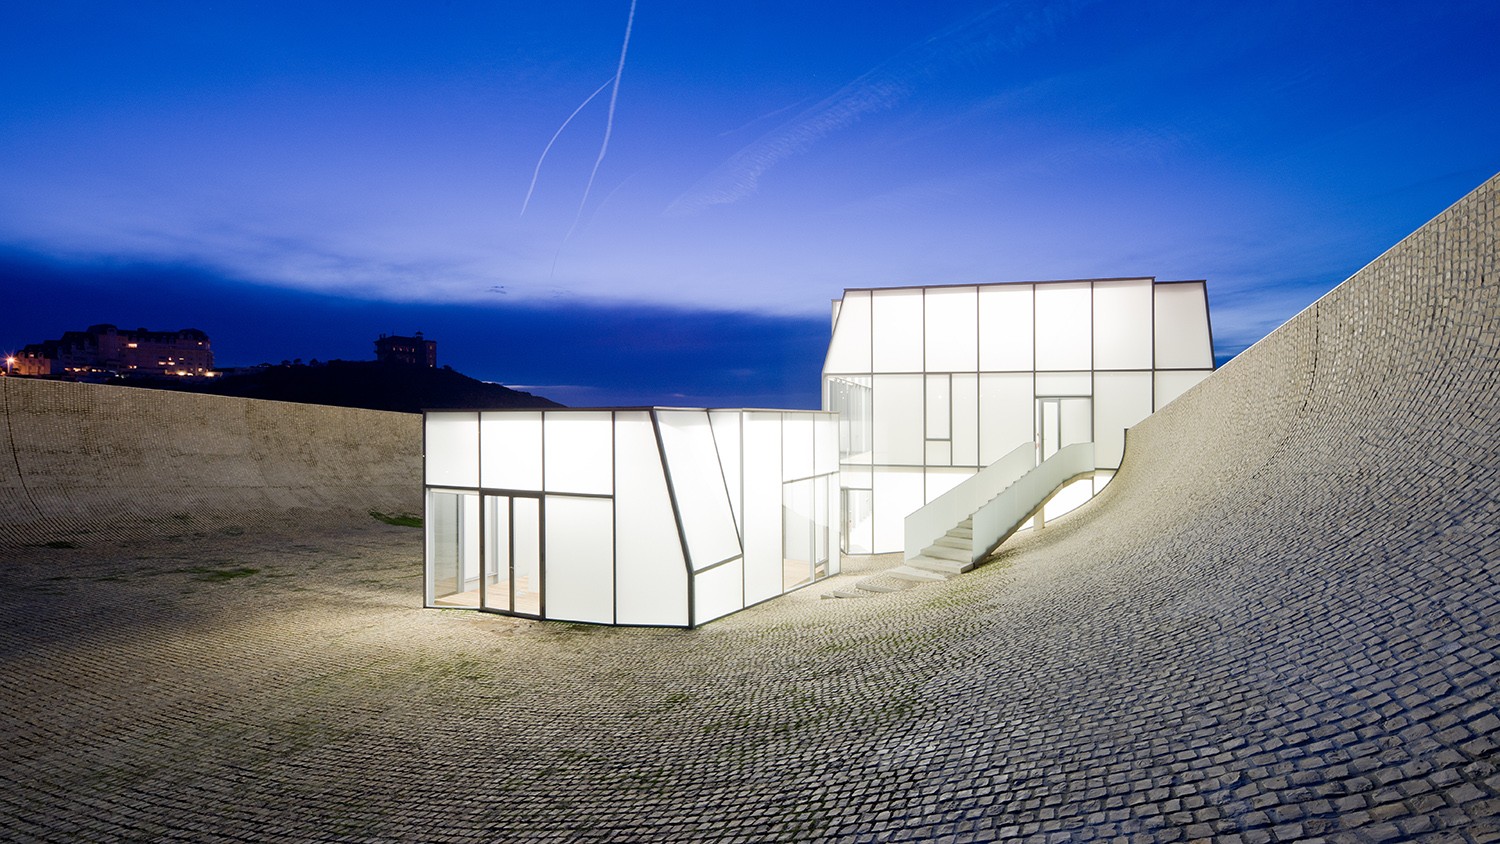 Painting With Light The Ethereal Glass Façades Of Steven Holl Architects